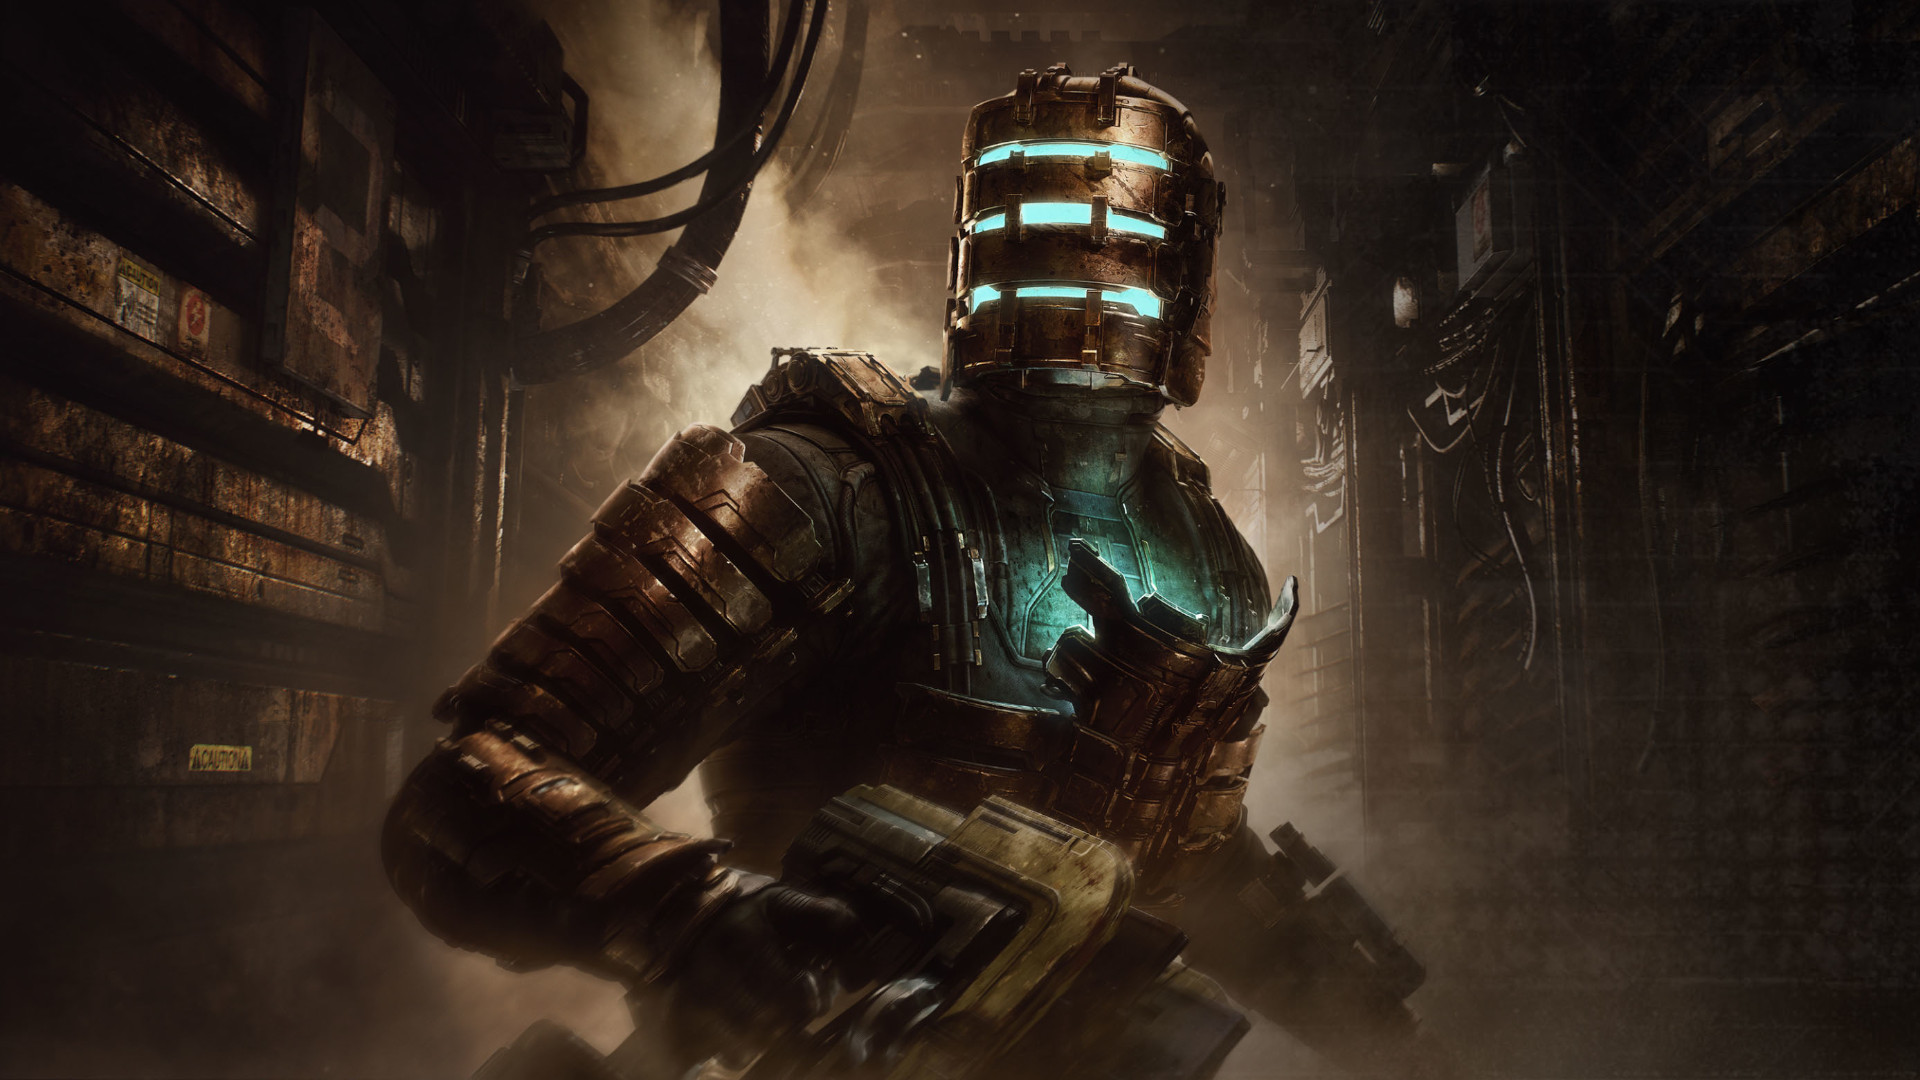 Dead Space protagonist Isaac Clarke, in the shadowy depths of the USG Ishimura